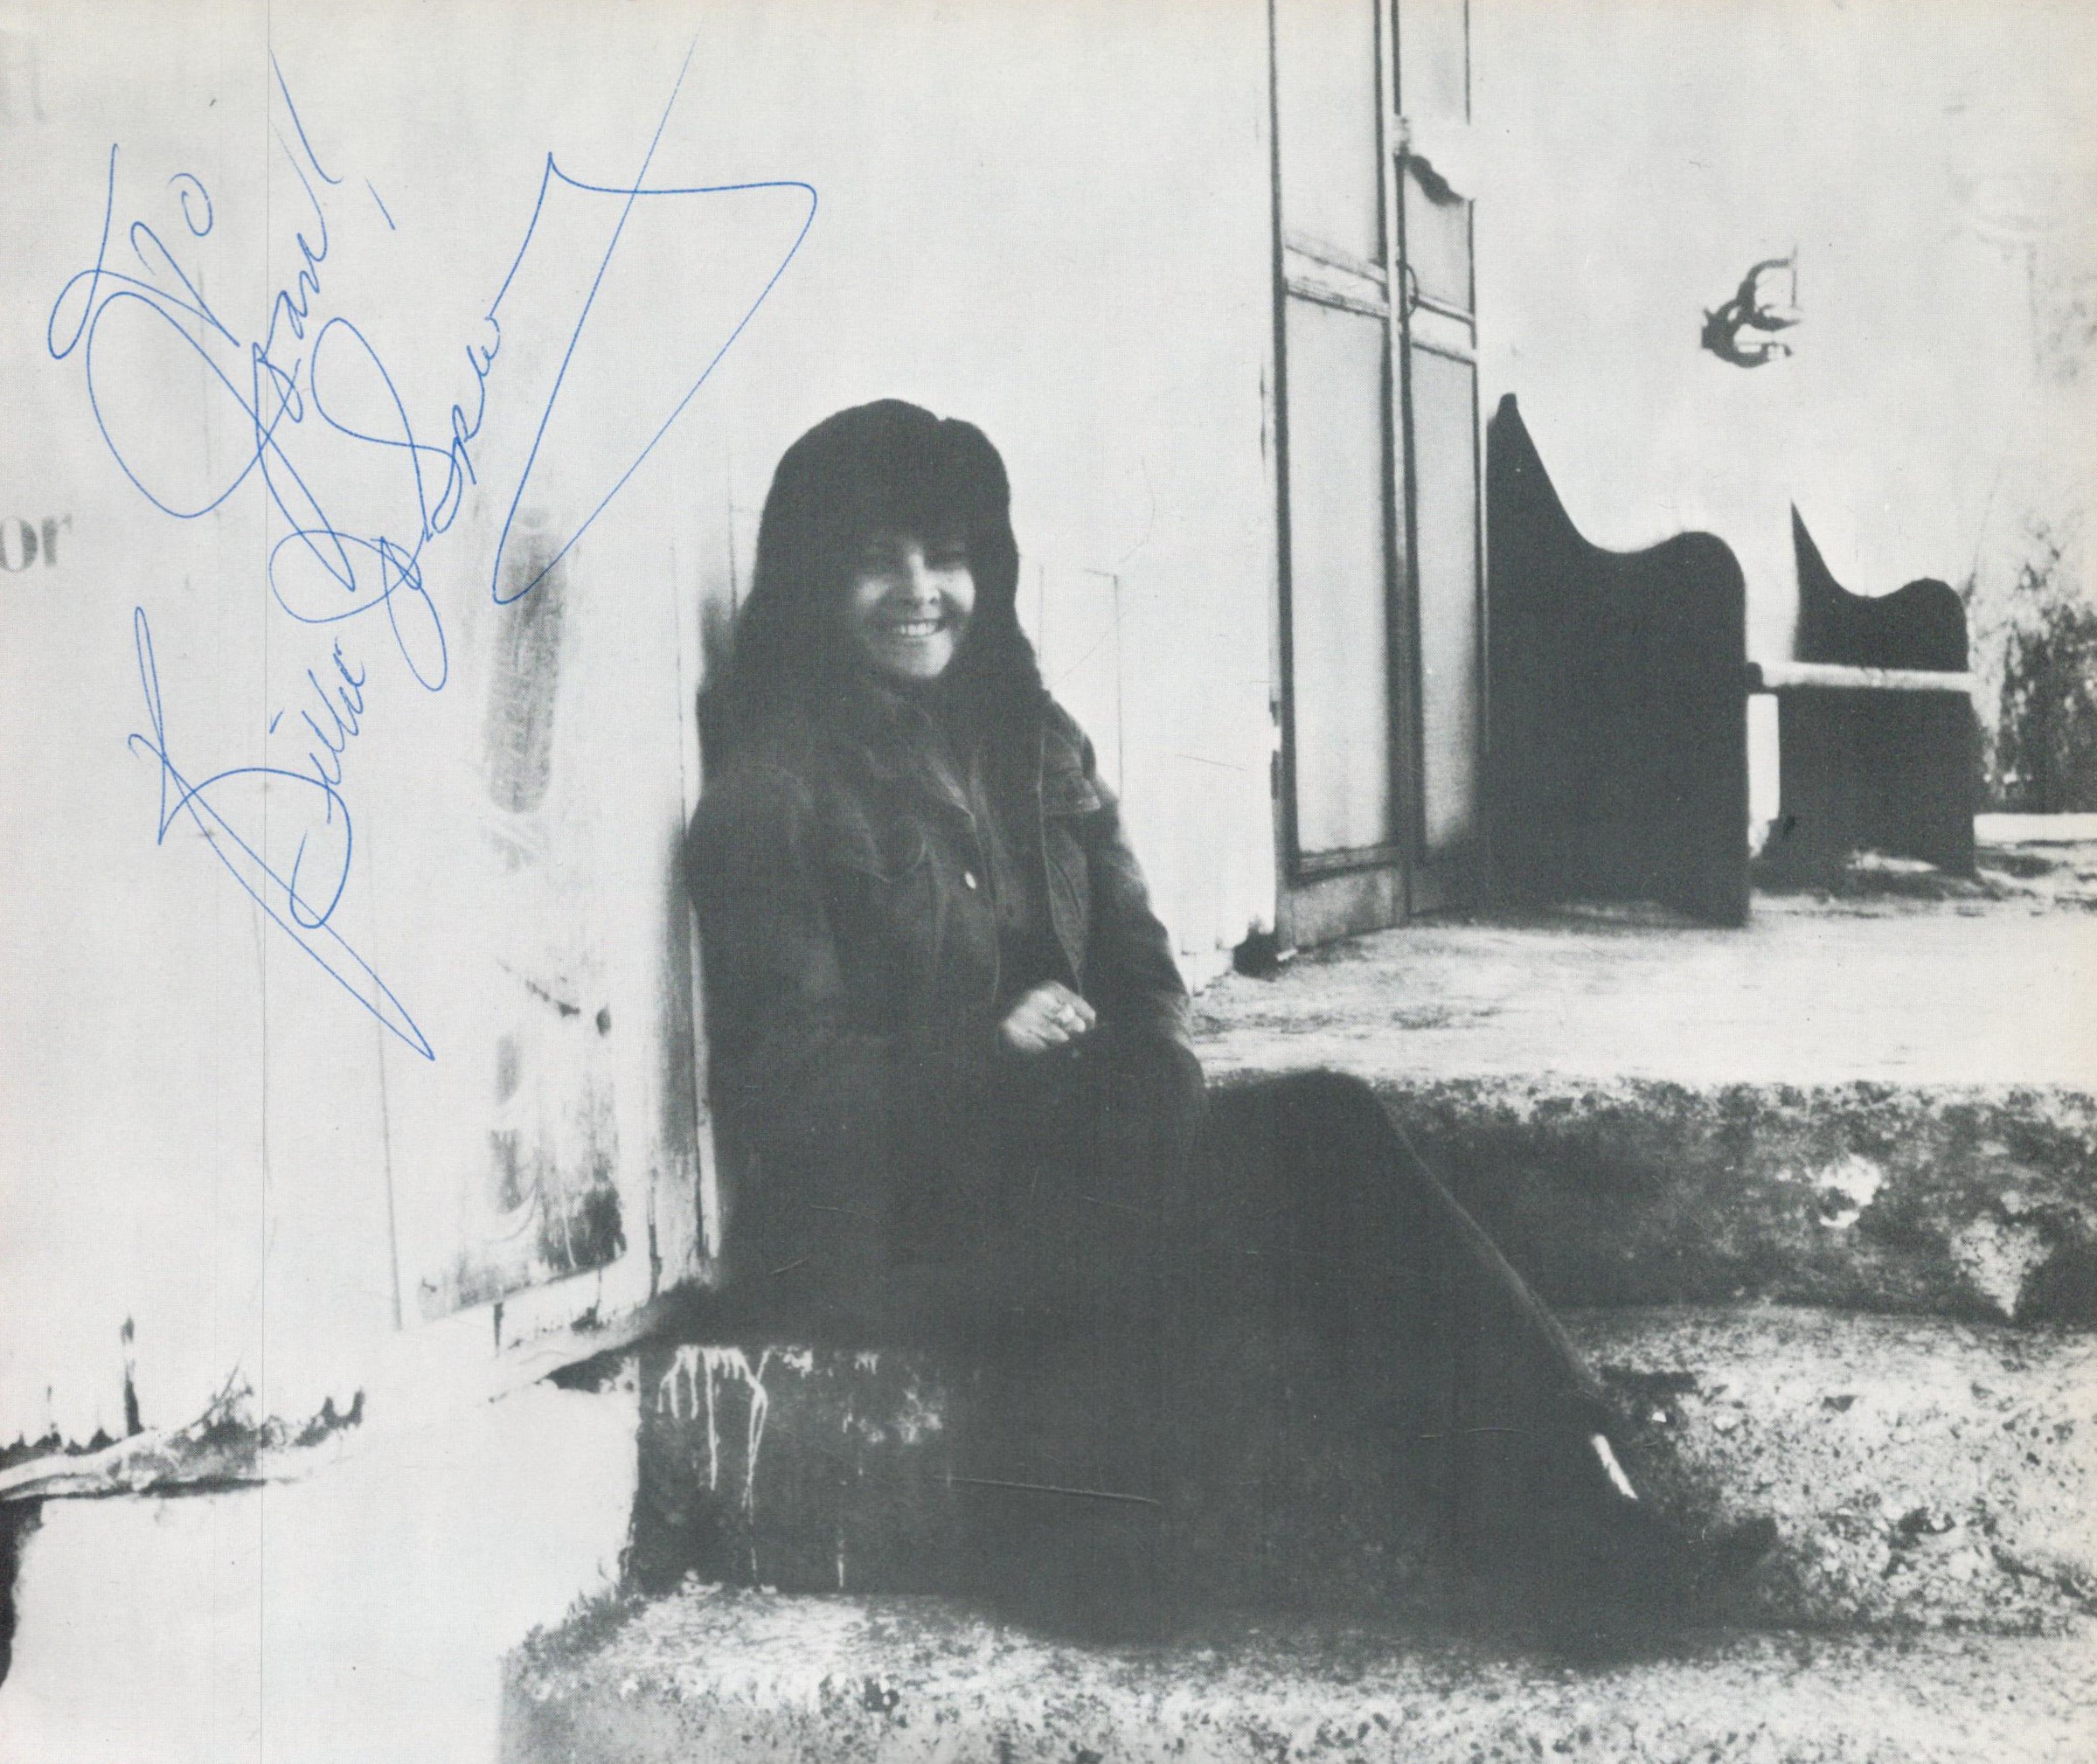 Billie Jo Spears Signed 8x7 inch Black and White Magazine Cutting. Signed in blue ink, dedicated.